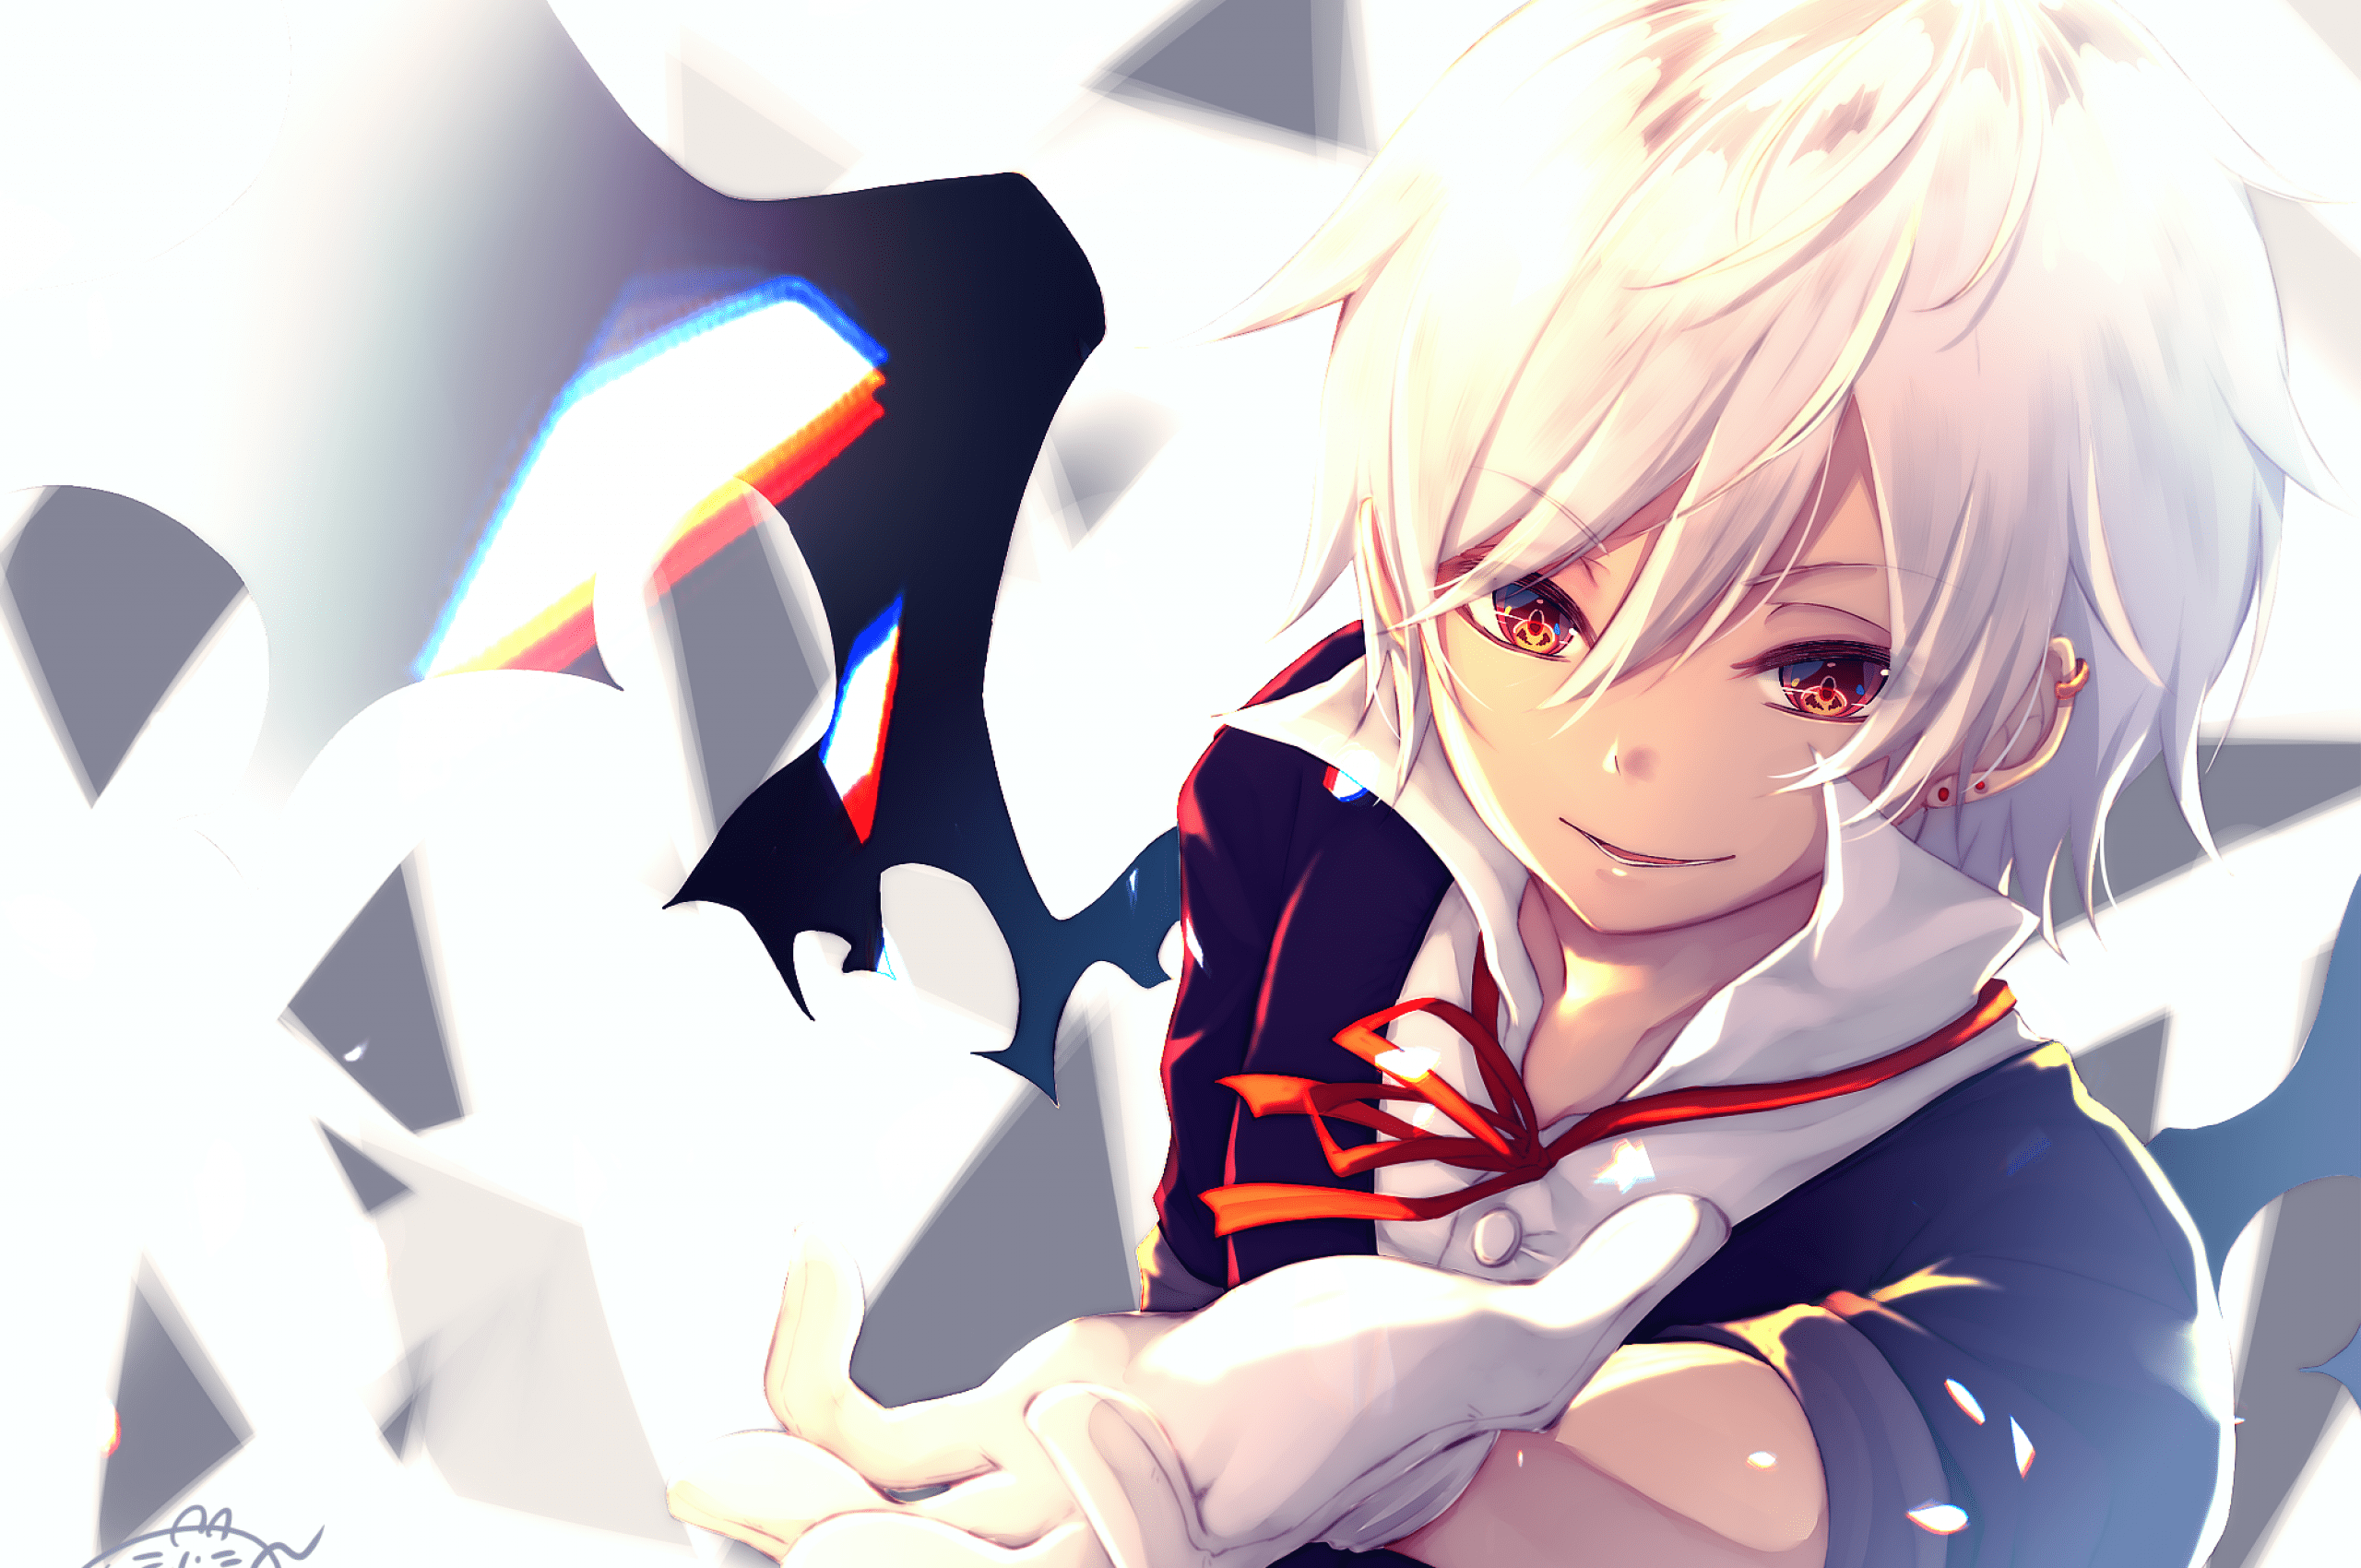 Dude White Hair  Anime Boy White Hair  951x1213 PNG Download  PNGkit